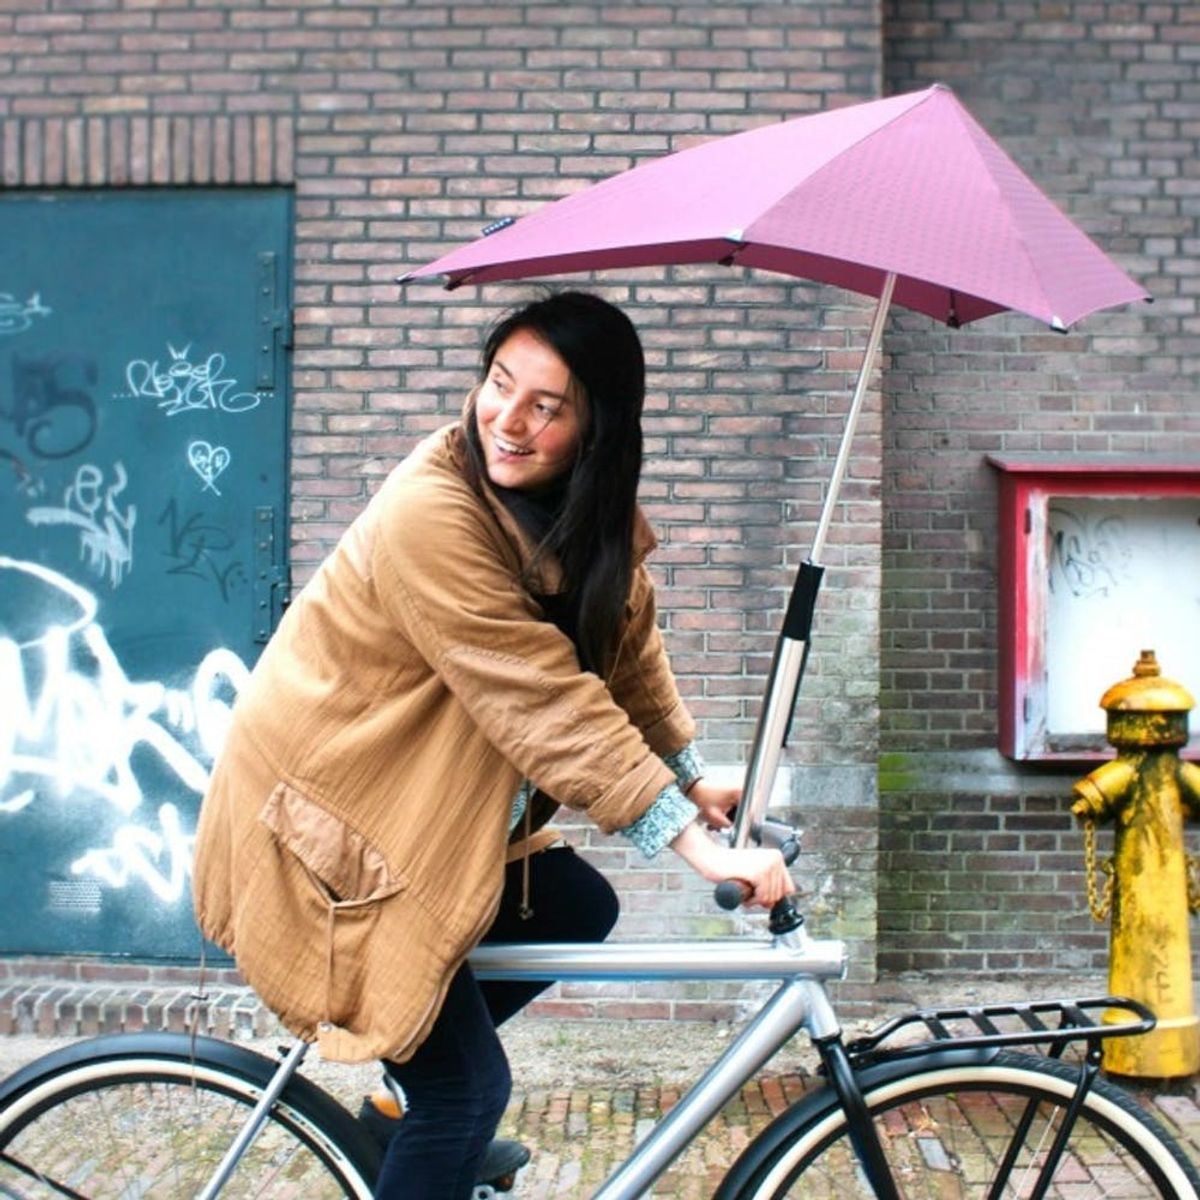 Bikers, There’s Now an Umbrella for Your Bike